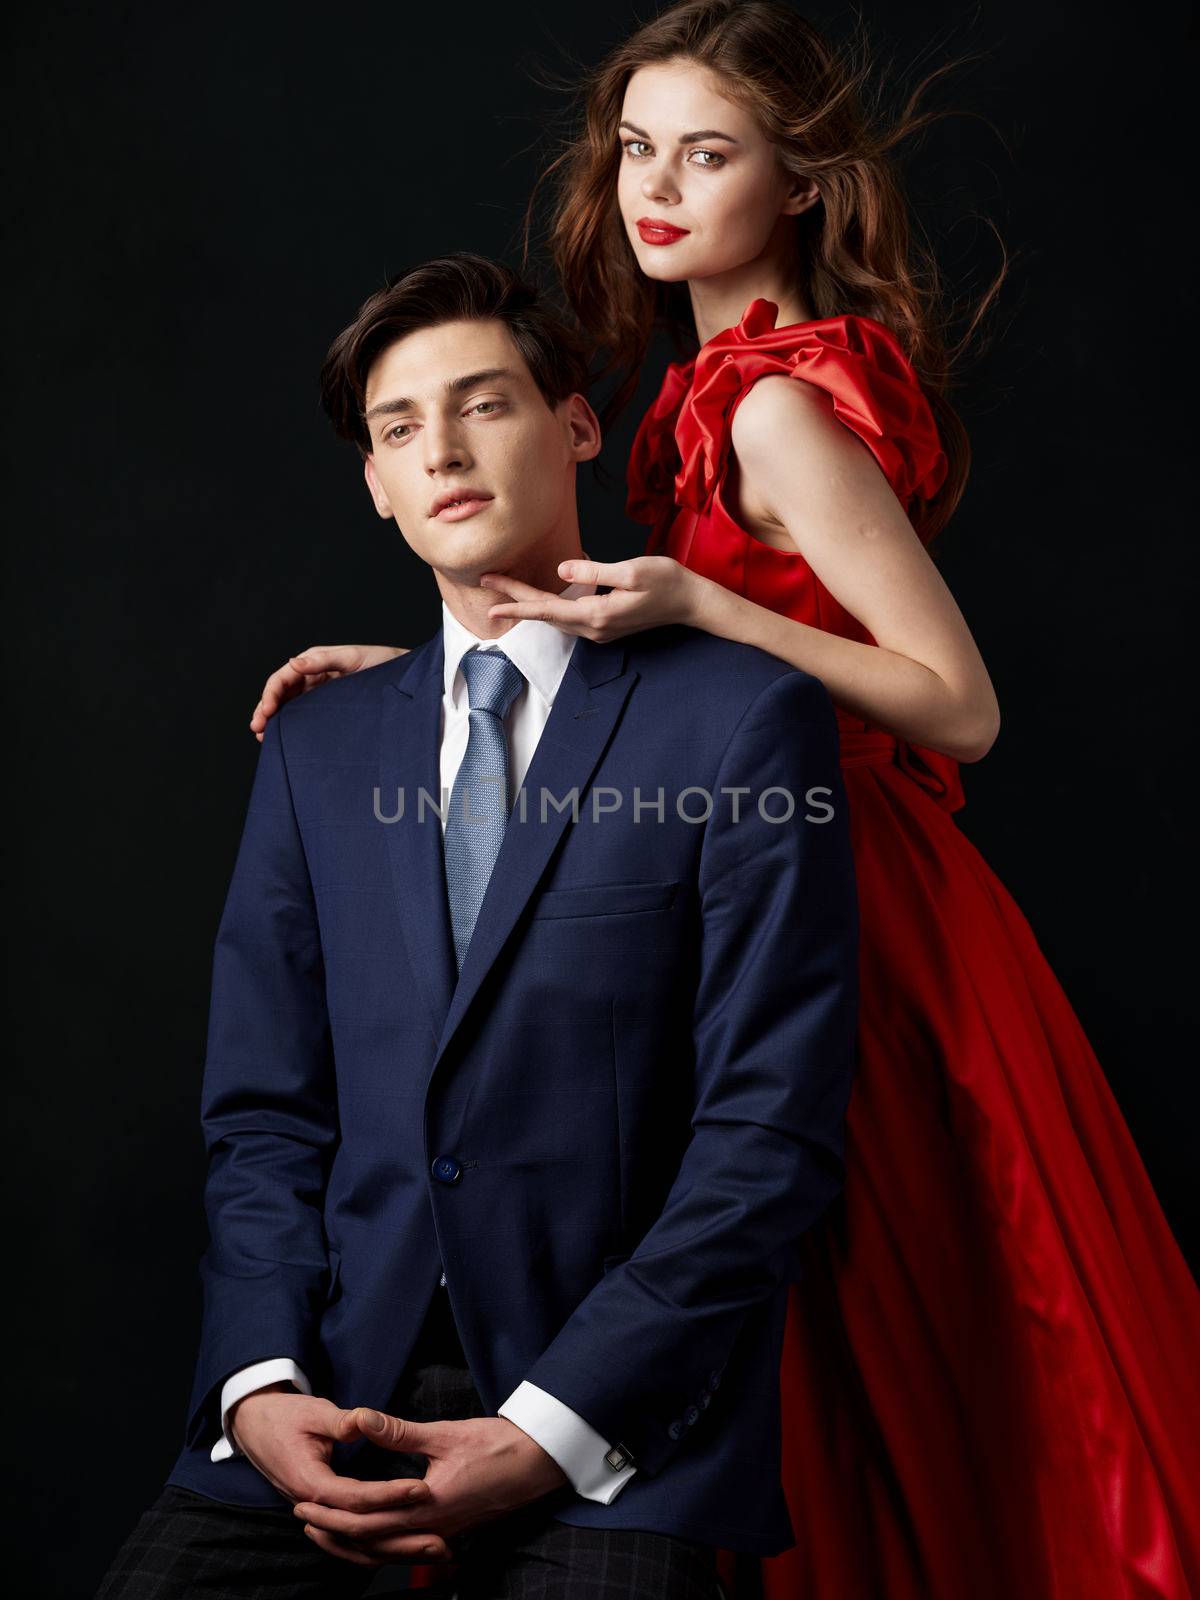 Charming couple man in suit woman in red dress relationship romance portrait family